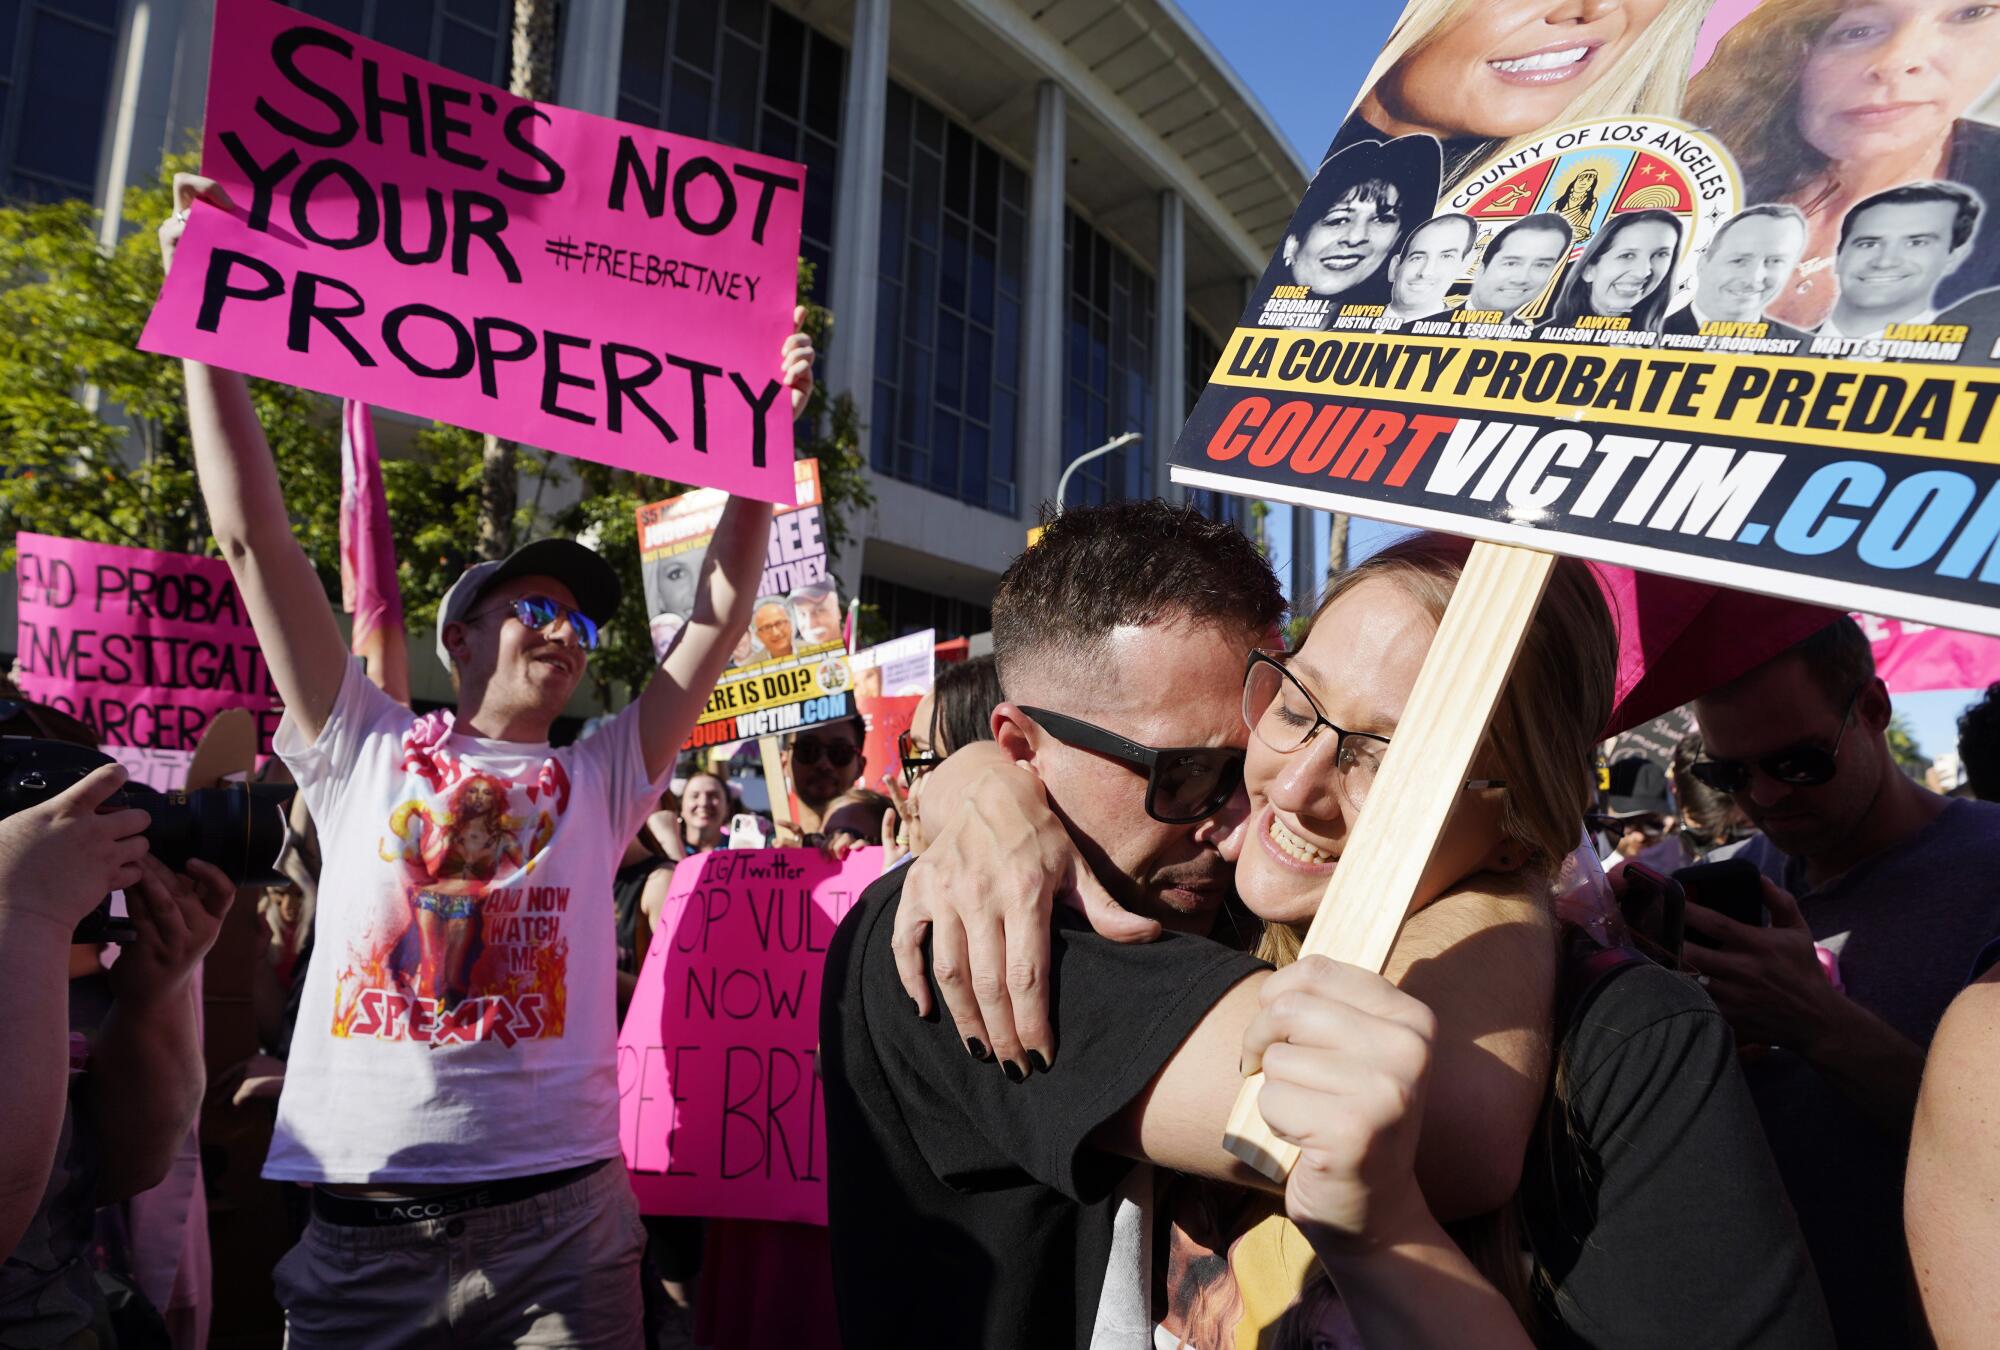 Britney Spears supporters Aaron Morris, second from right, and Elizabeth Crocker embrace